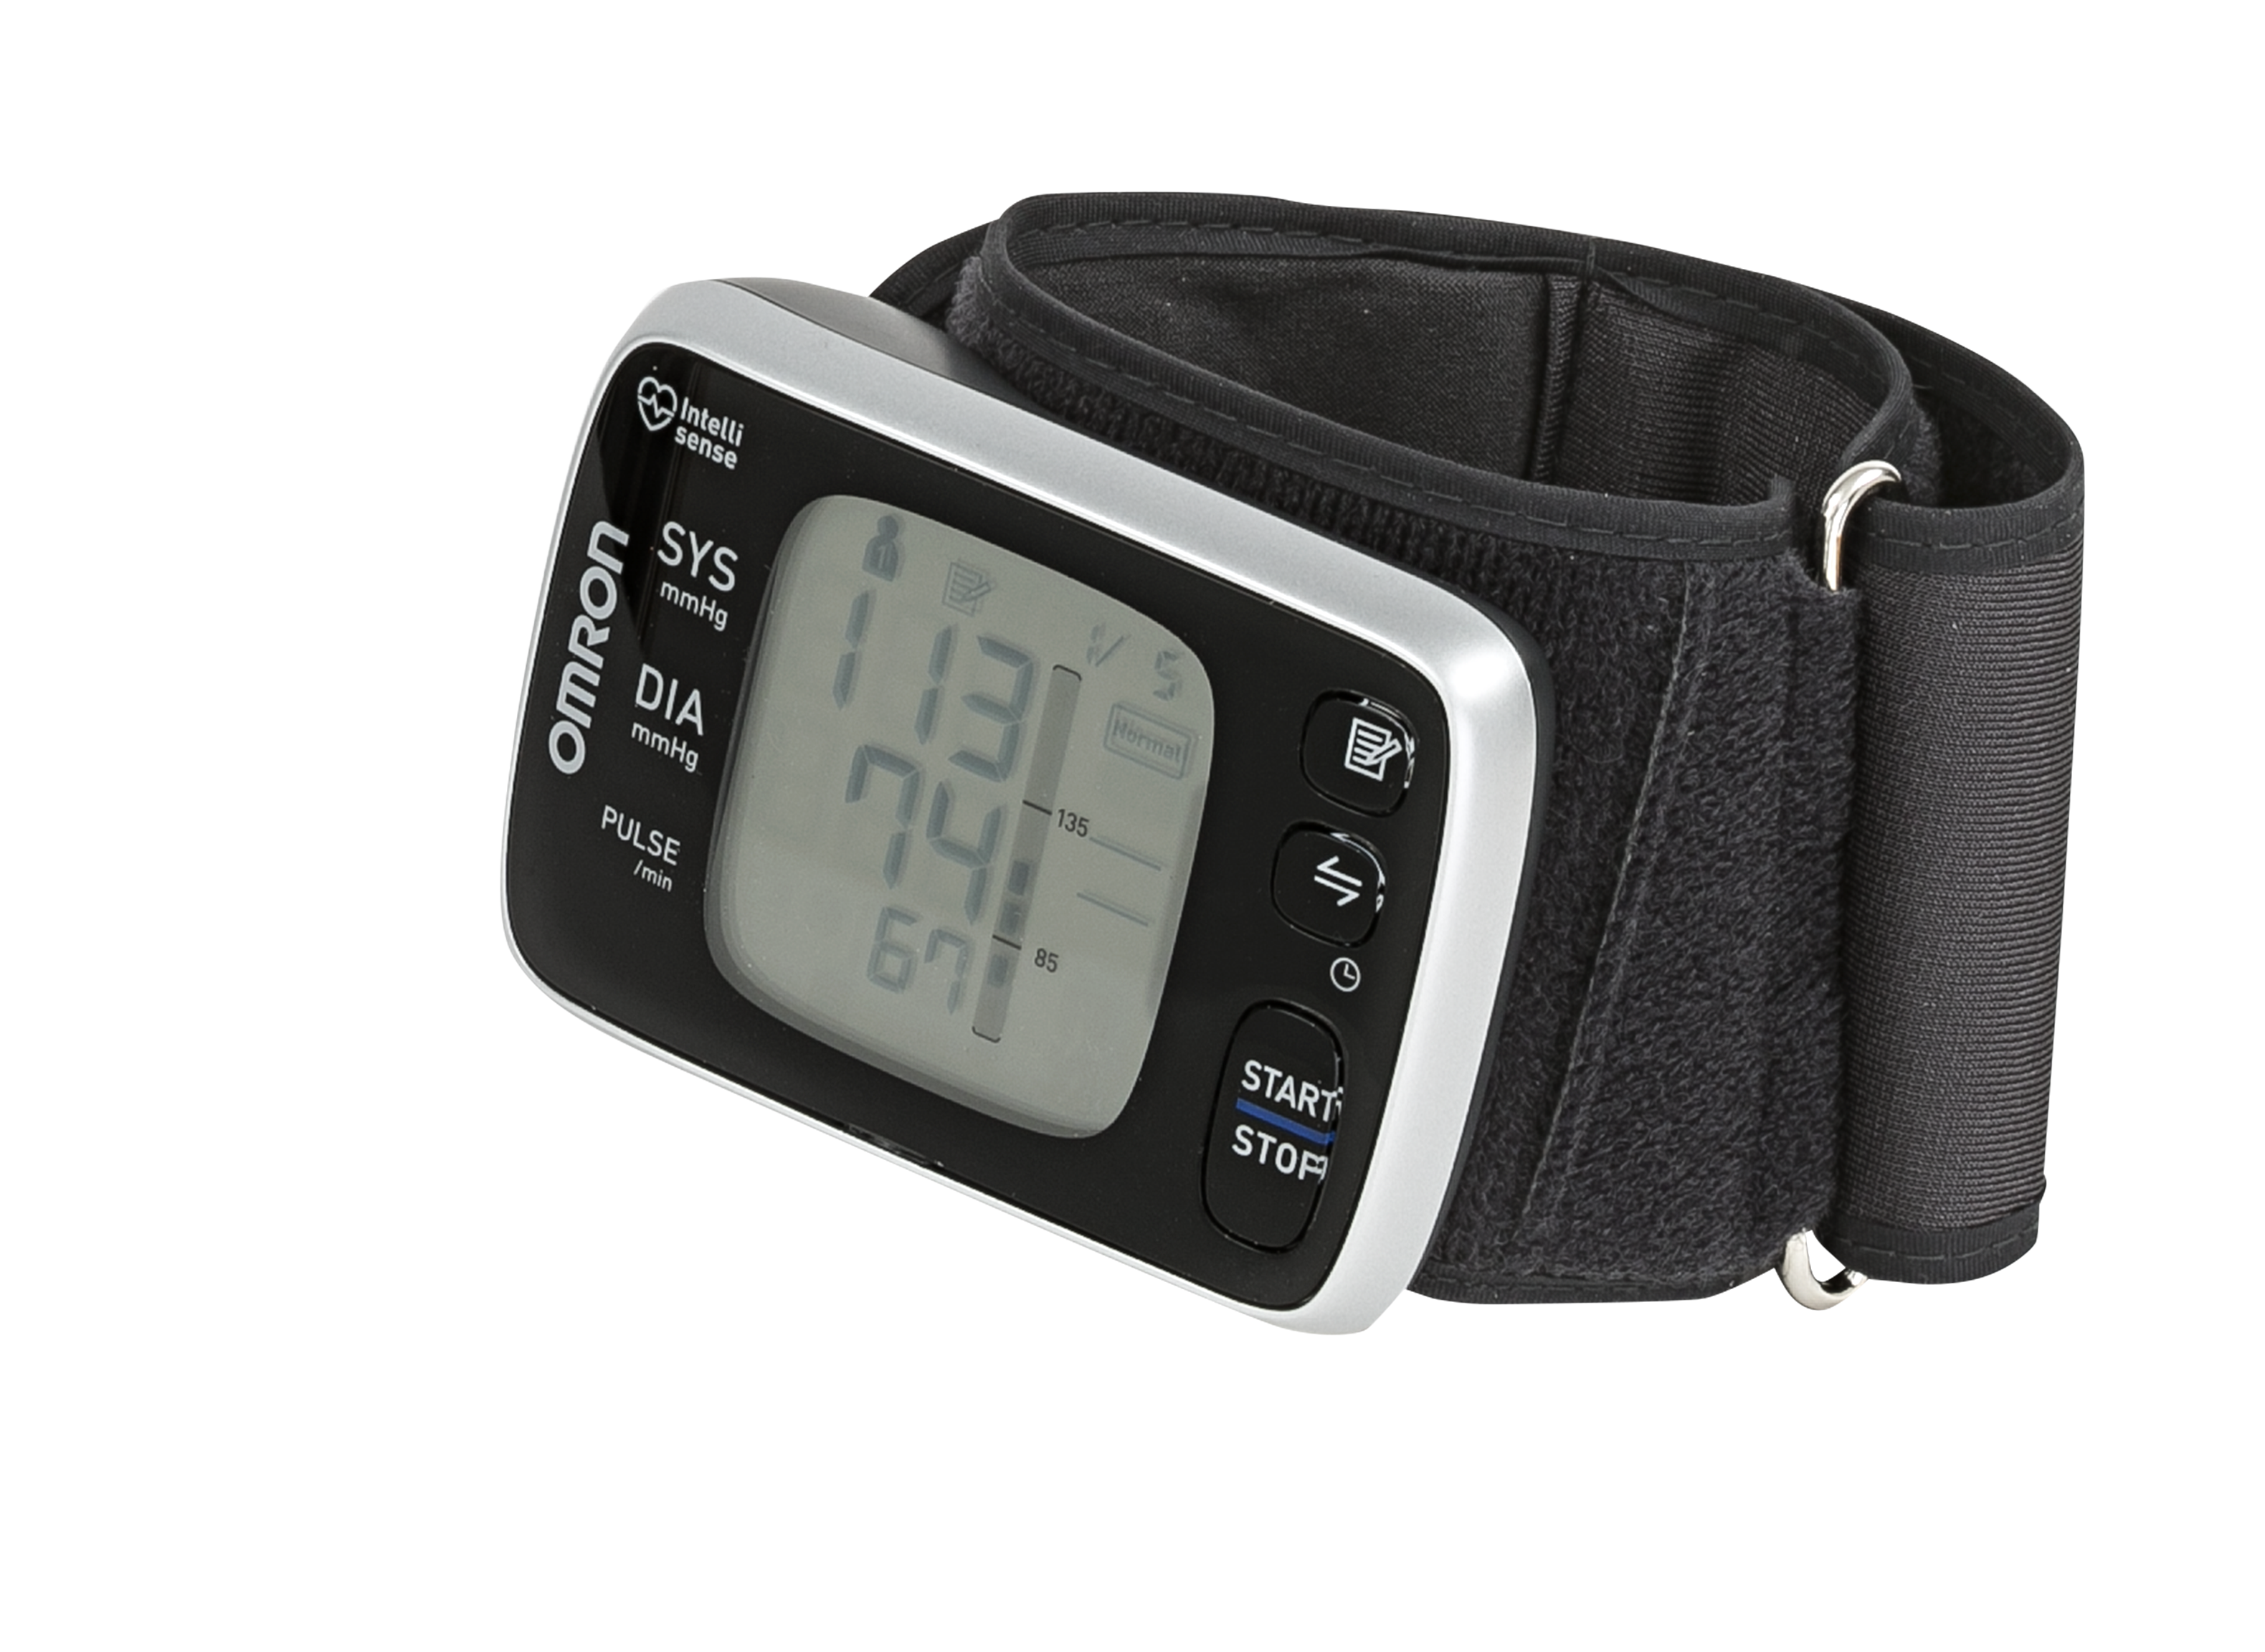 Omron 10 Series Digital Blood Pressure Monitor With Bluetooth